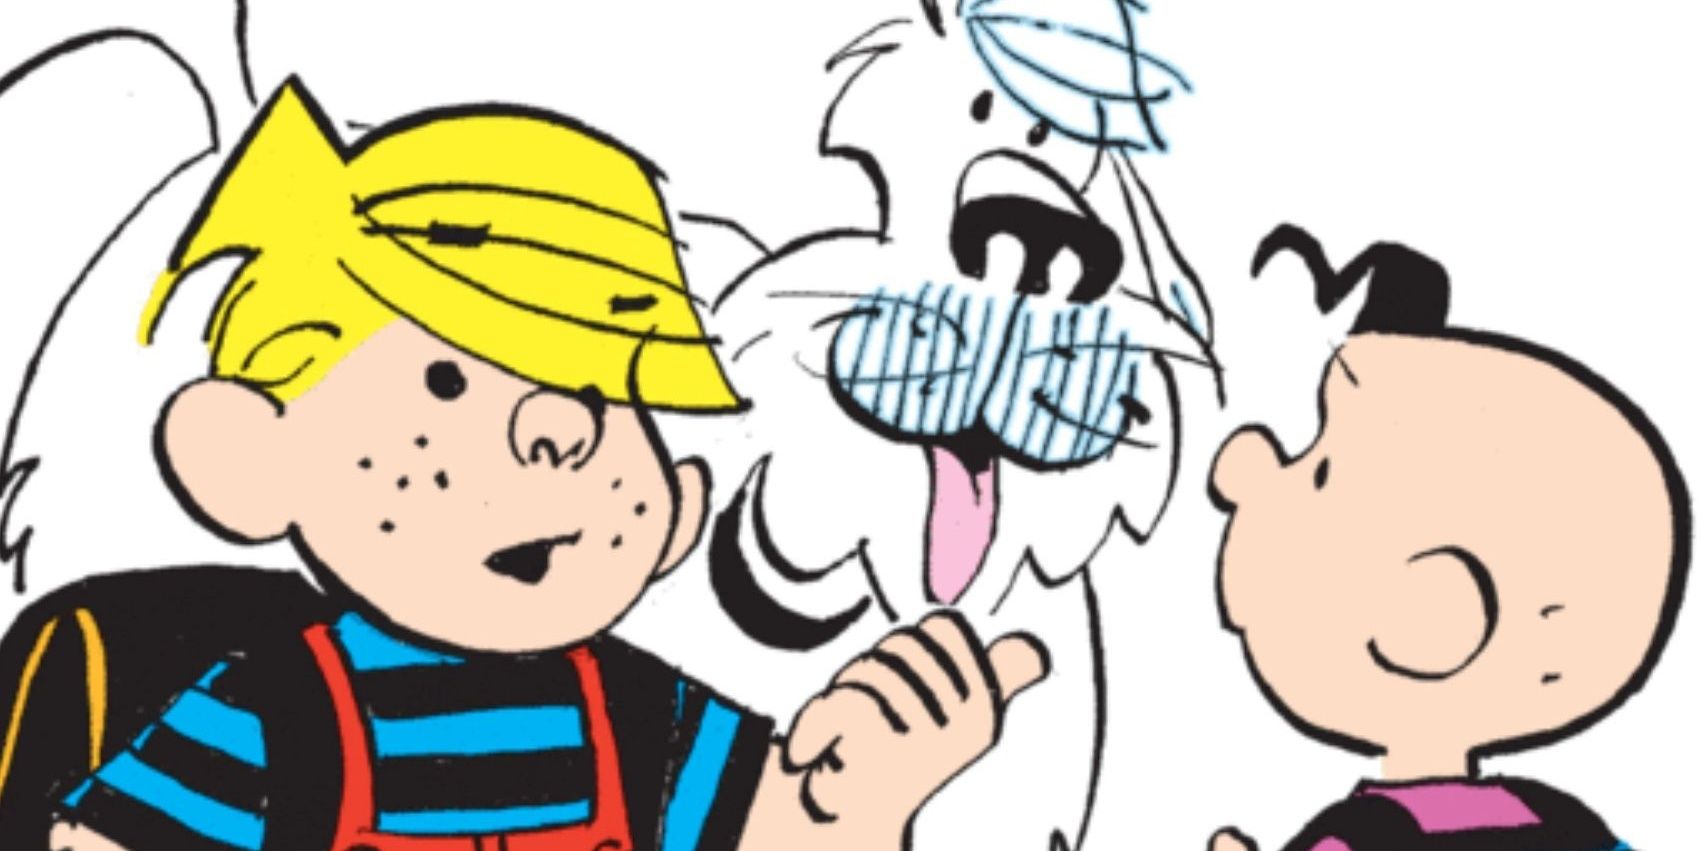 Dennis the Menace with Joey and his dog, Ruff